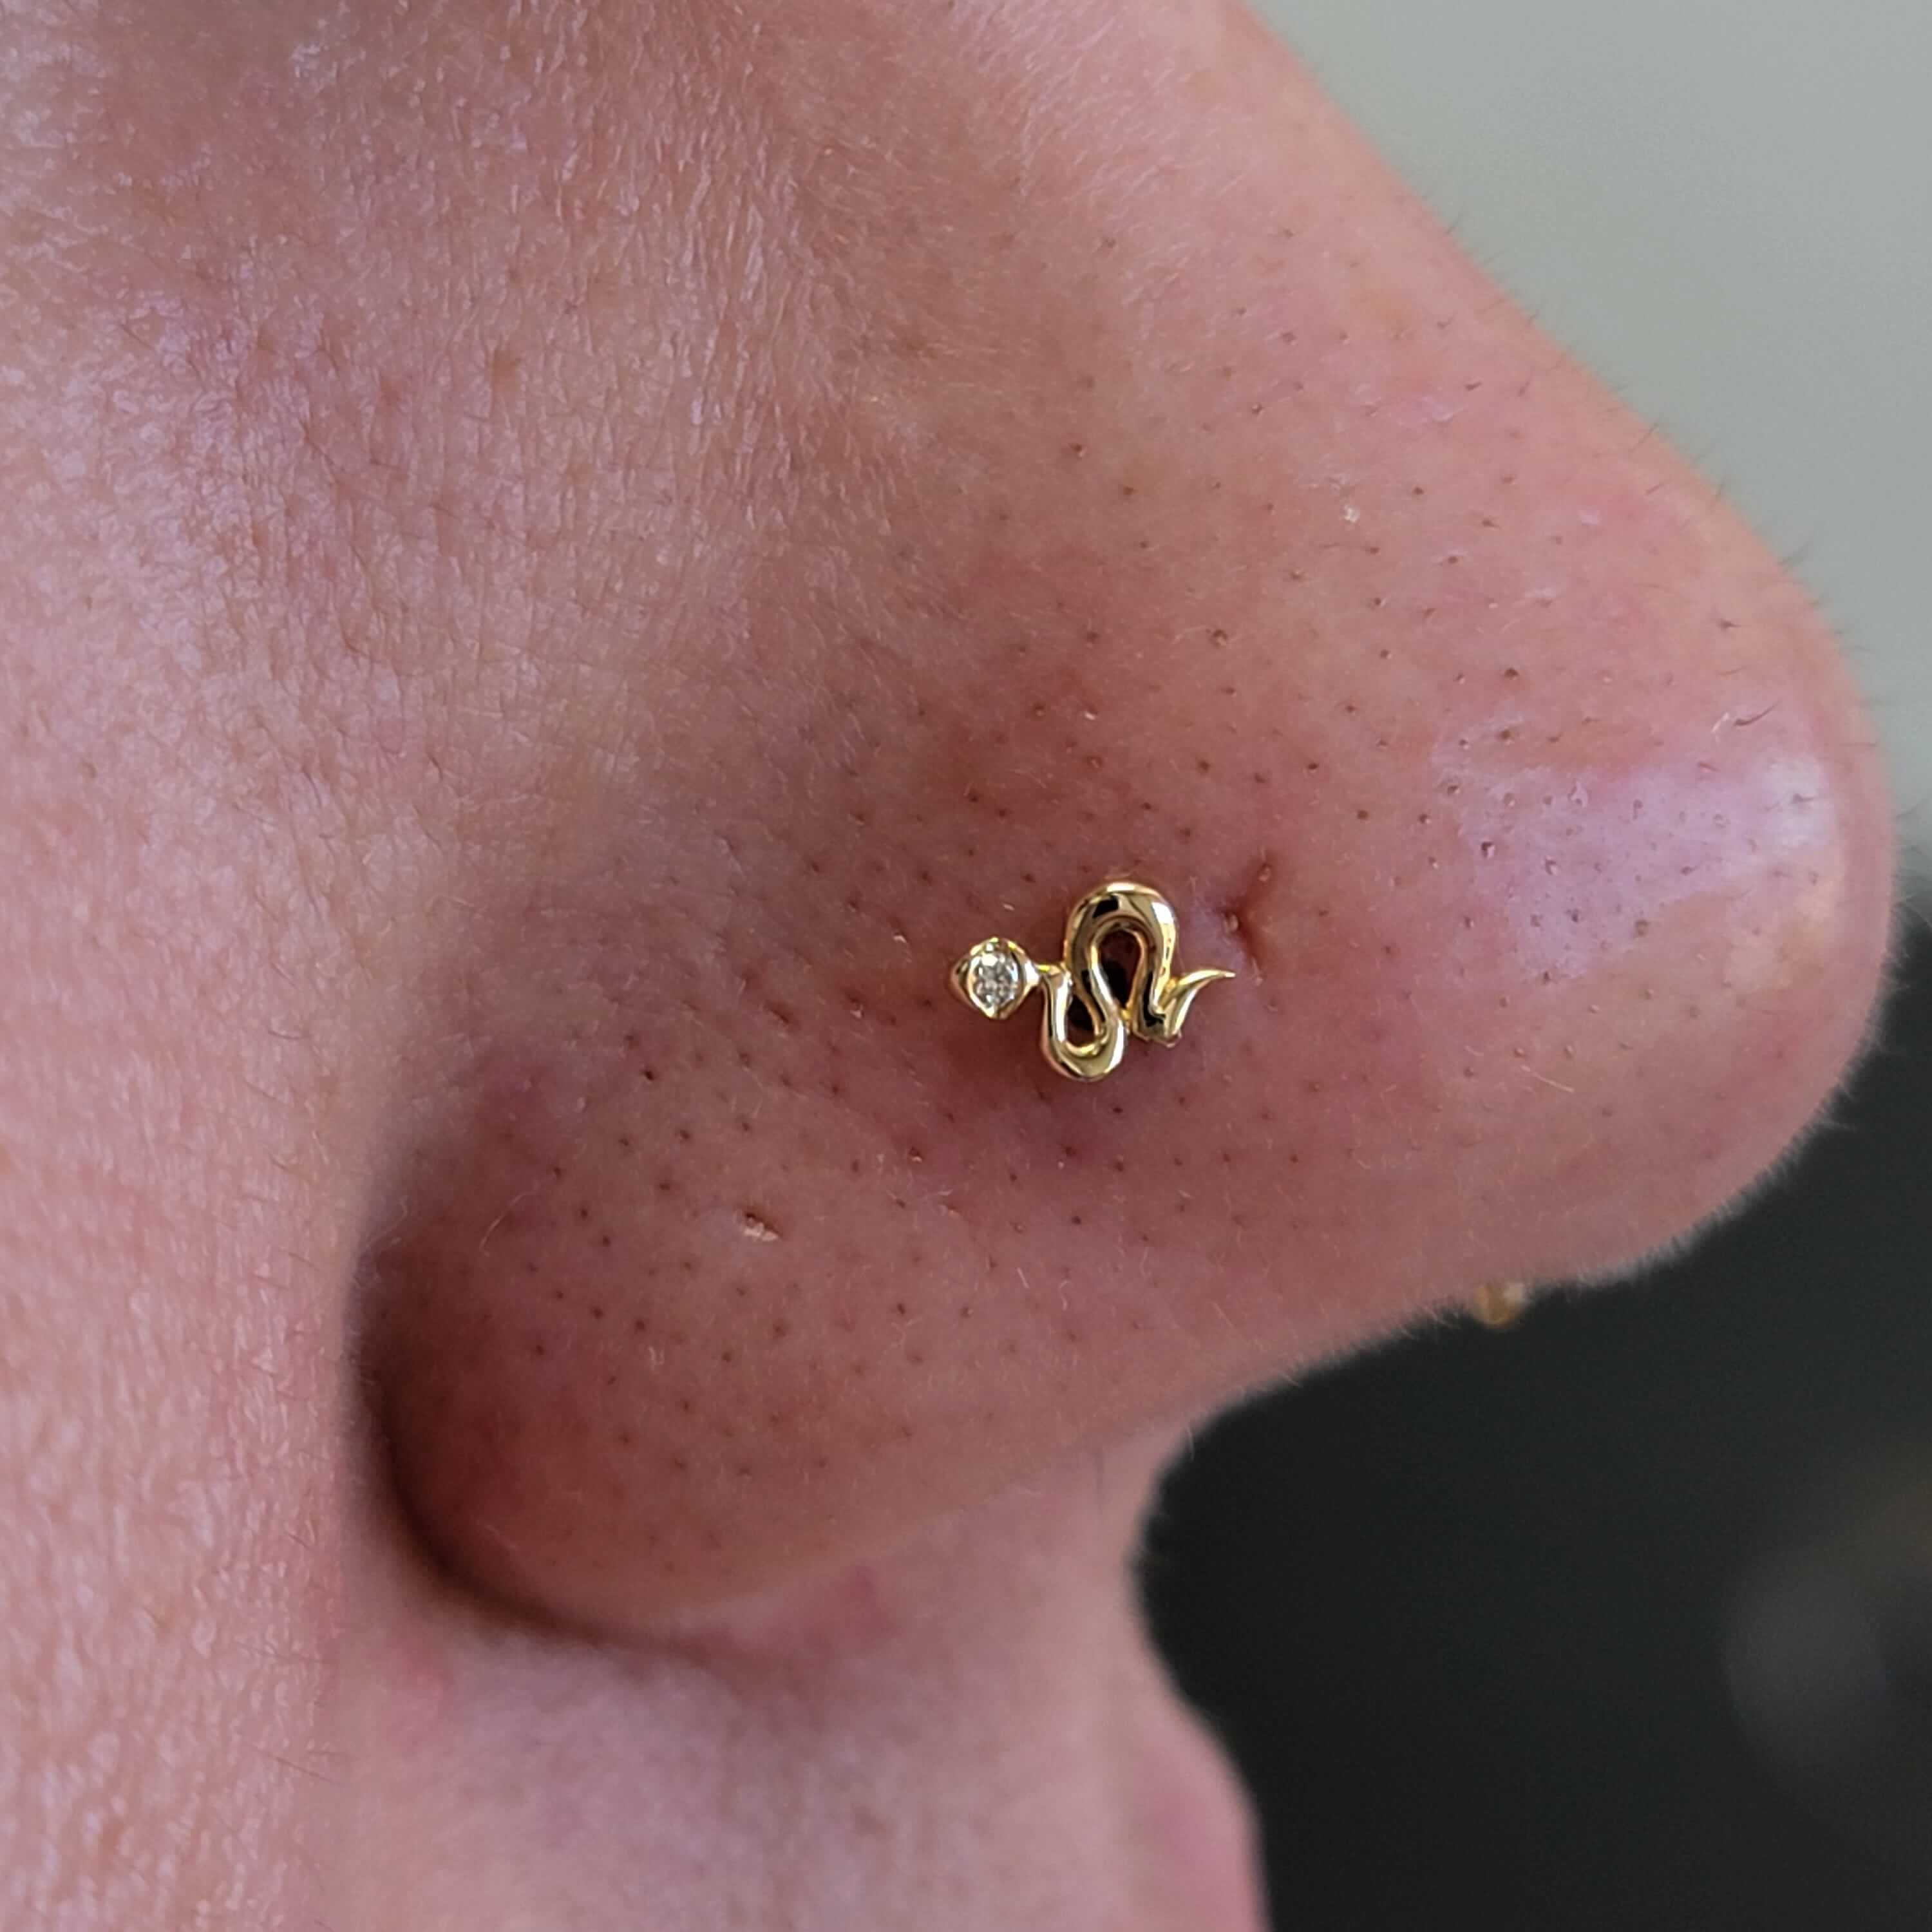 Nostril piercing with a 14k gold snake and genuine diamond